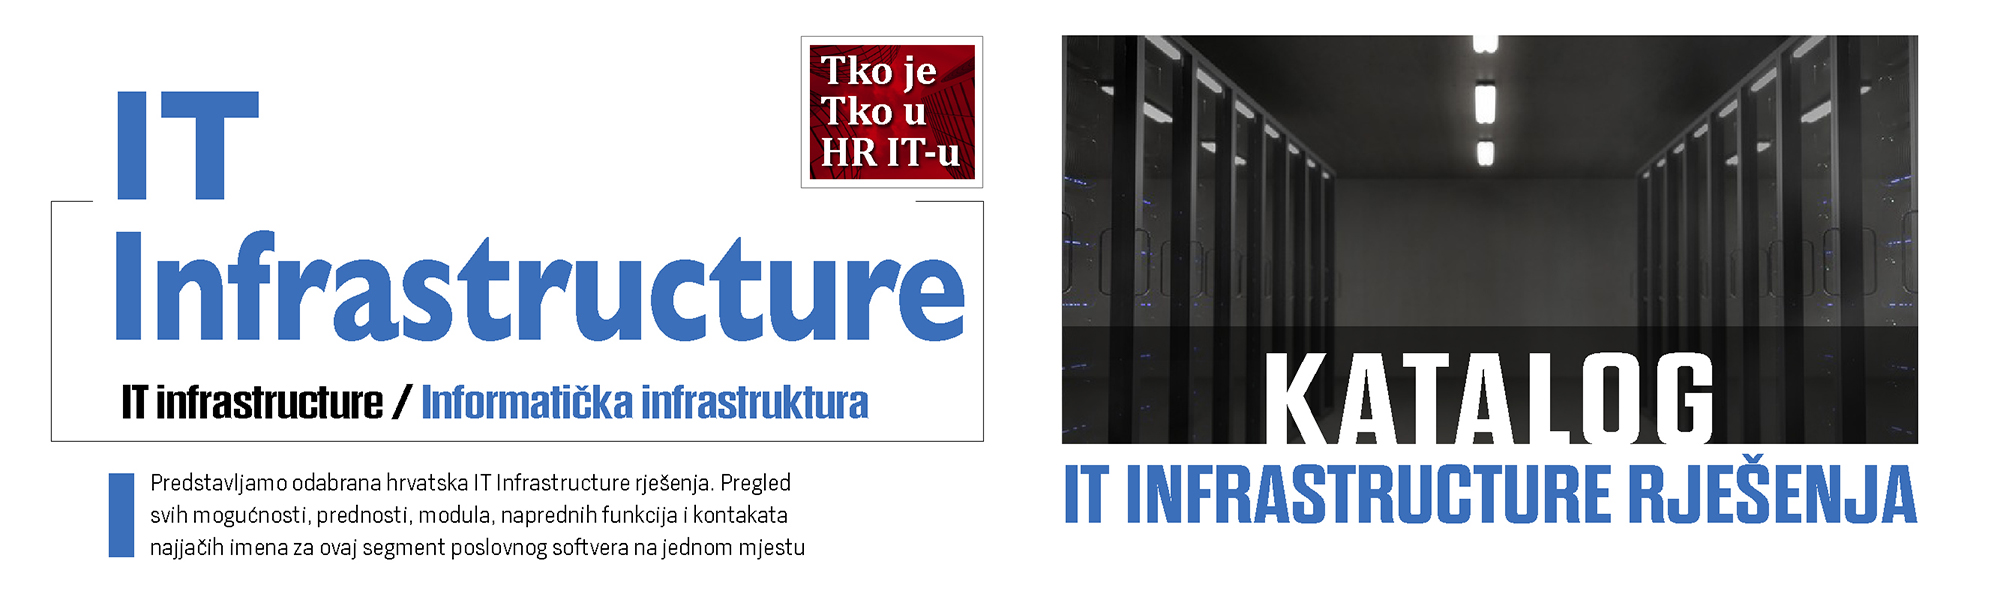 IT INFRASTRUCTURE